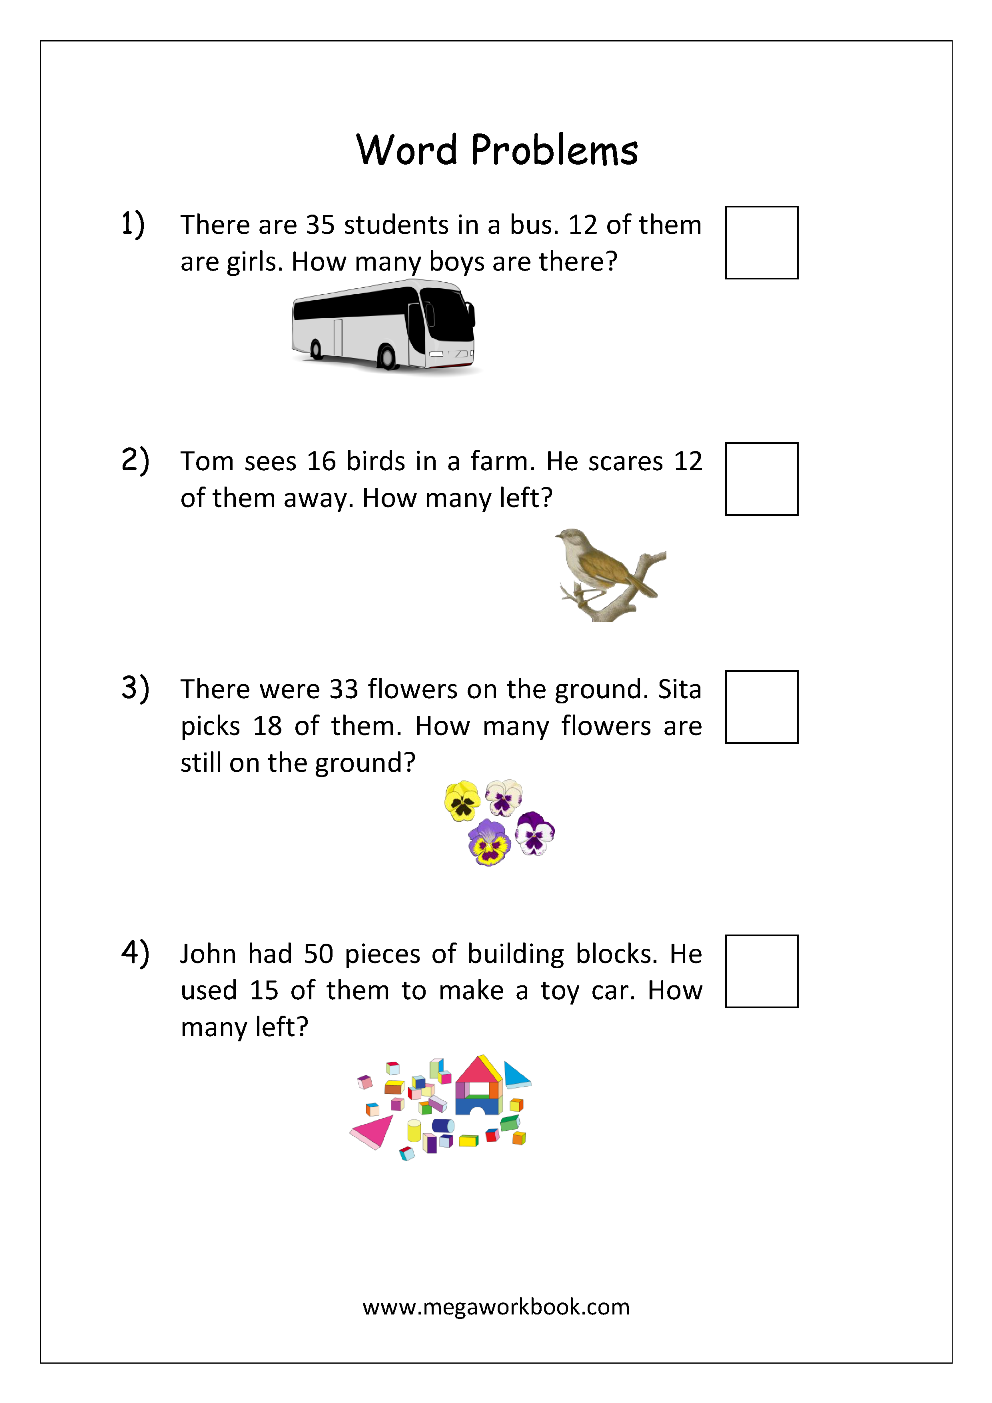 addition-and-subtraction-word-problems-worksheets-for-kindergarten-and-grade-1-story-sums